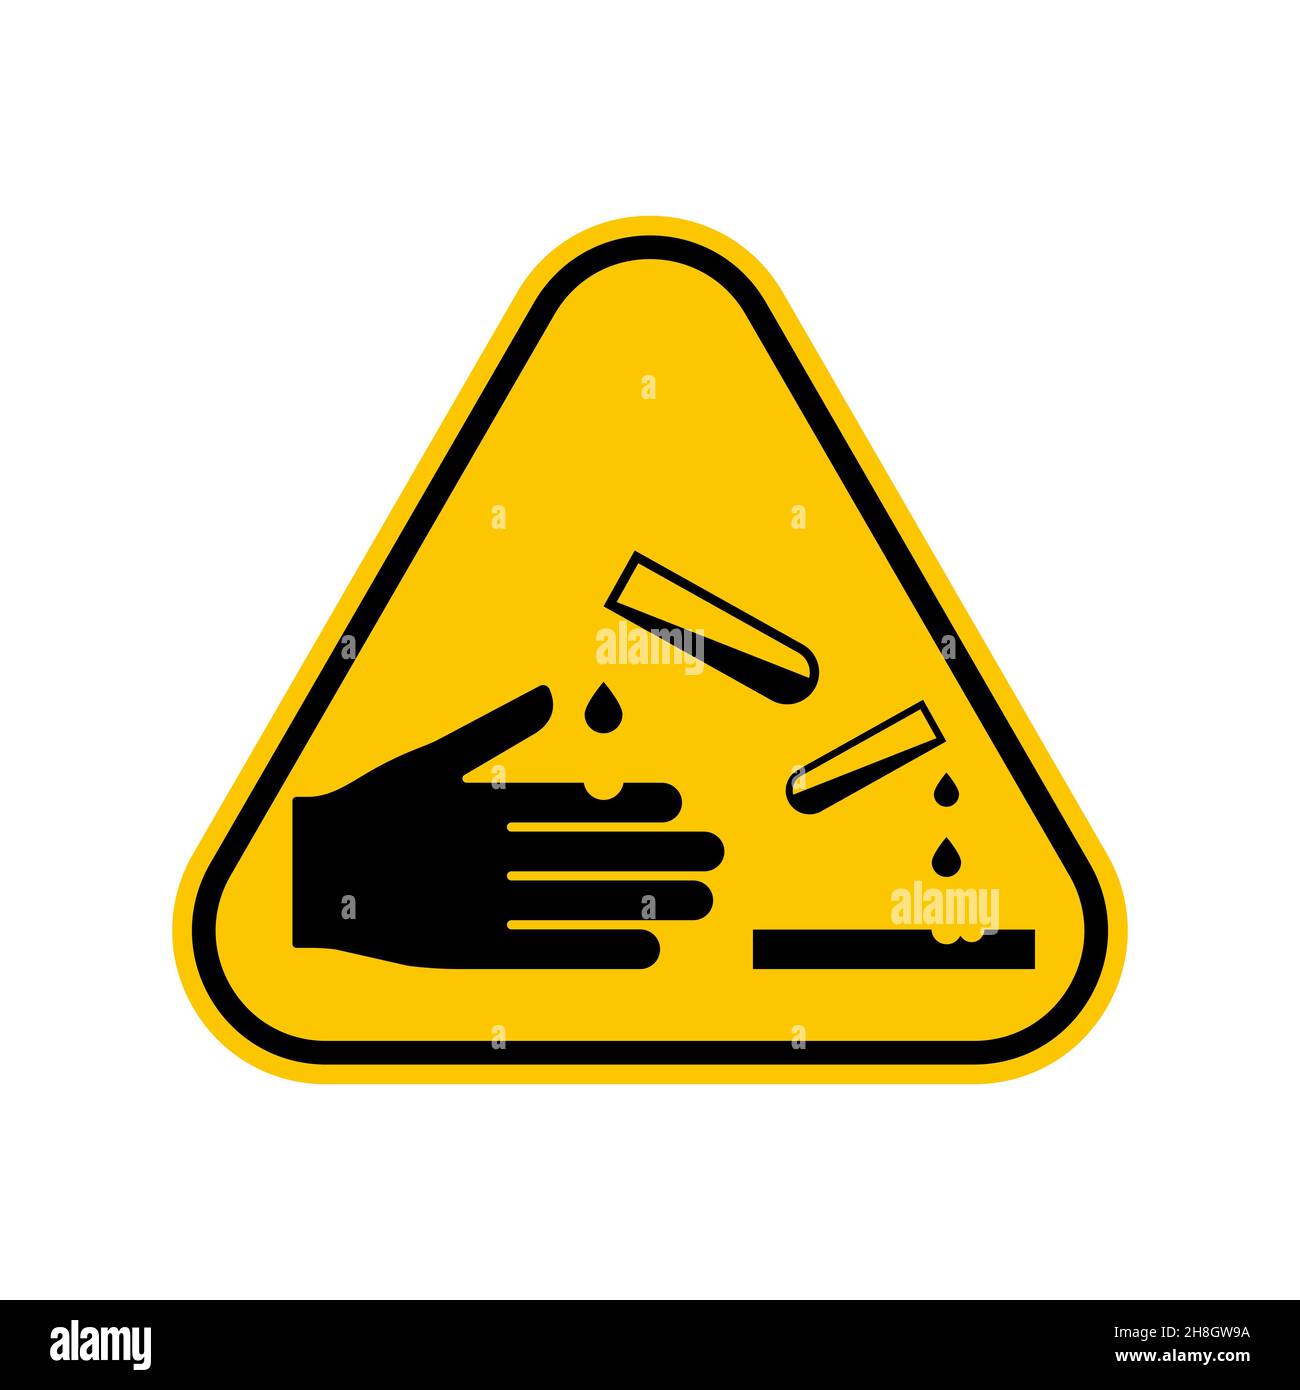 Corrosive symbol, chemical hazard sign , Yellow Triangle Caution Symbol, isolated on white background, vector icon Stock Vector